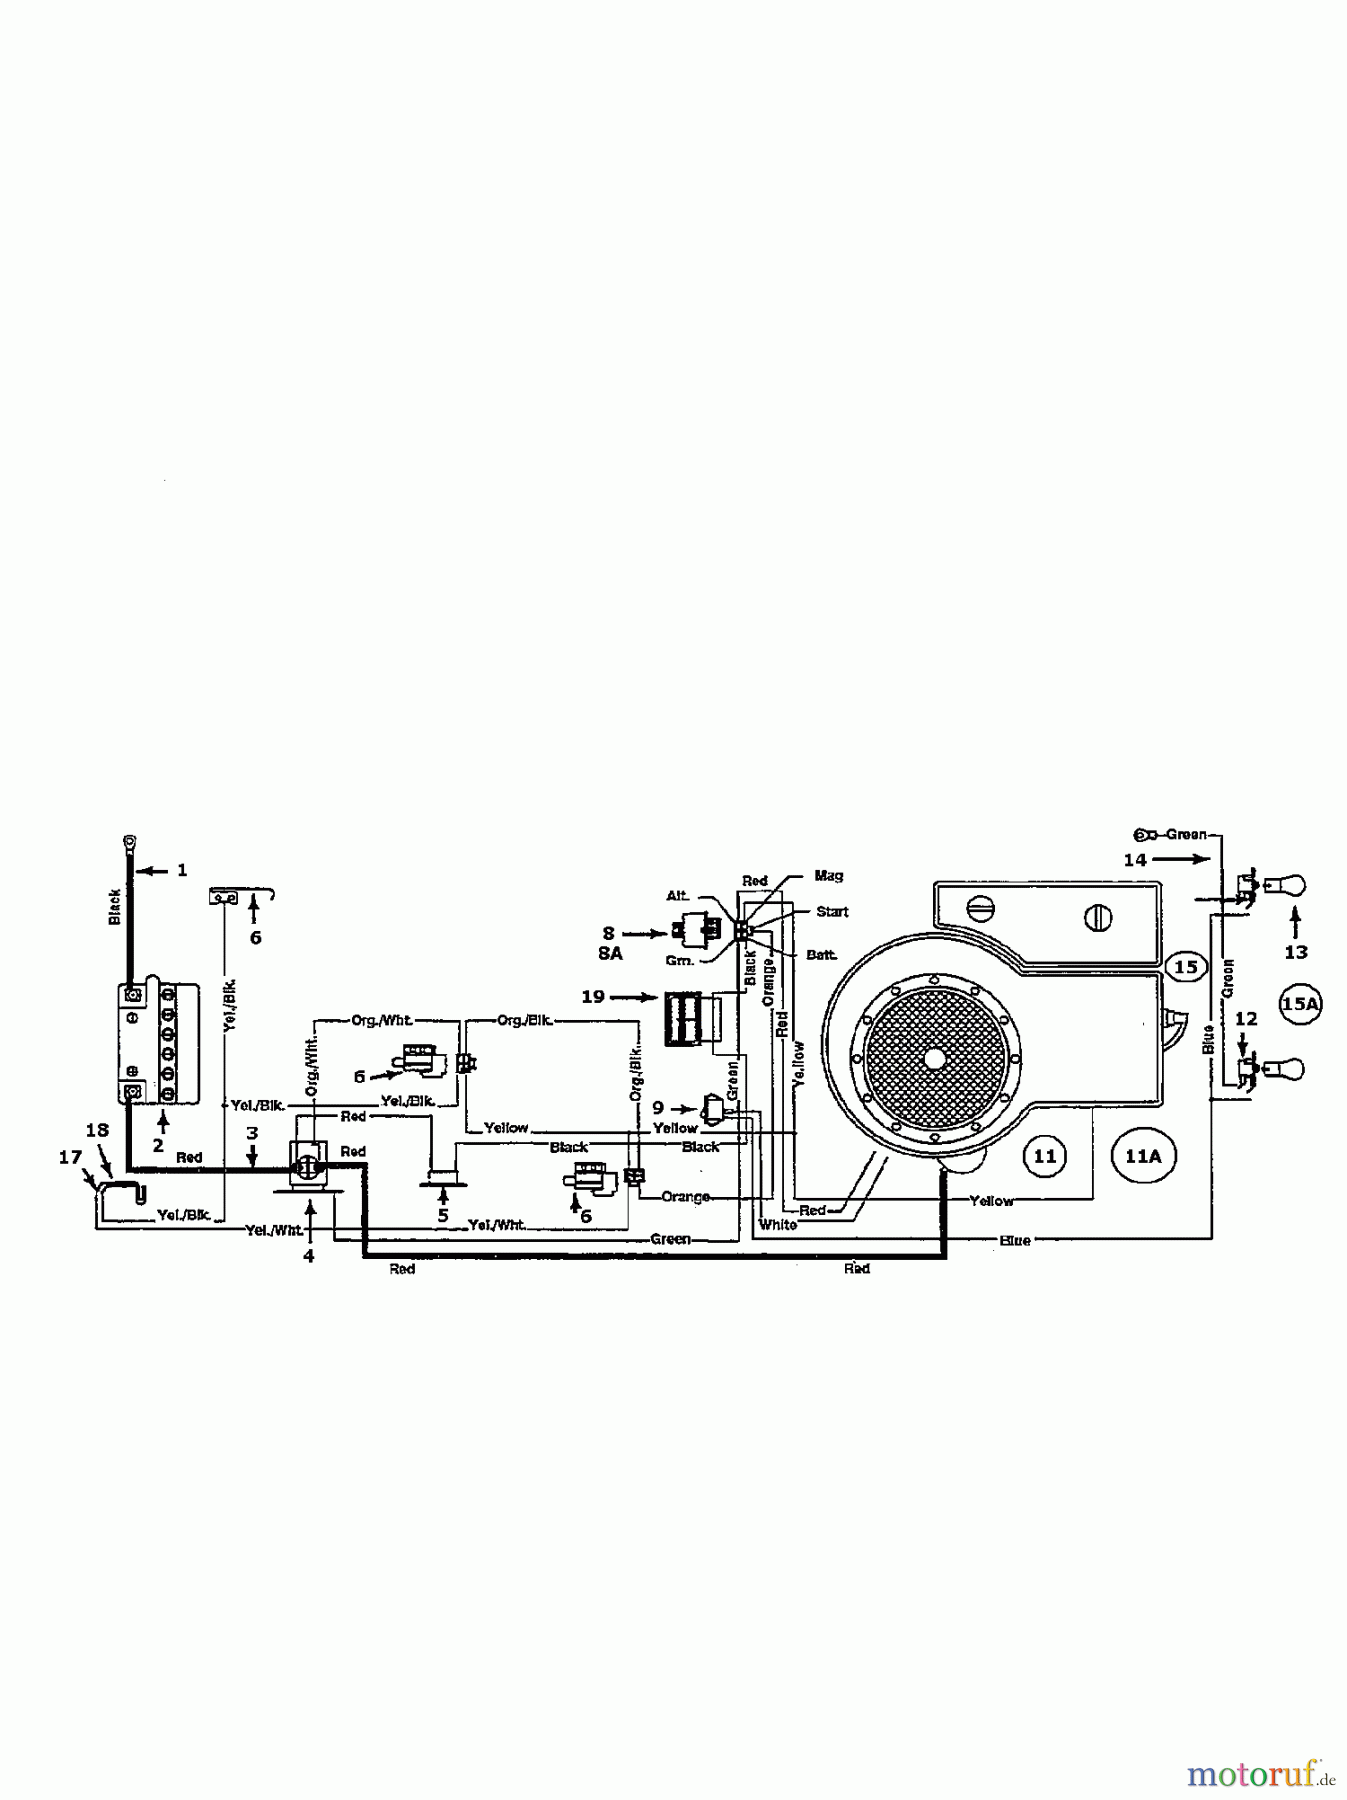  Agria Lawn tractors 4600/91 134I450E609  (1994) Wiring diagram single cylinder